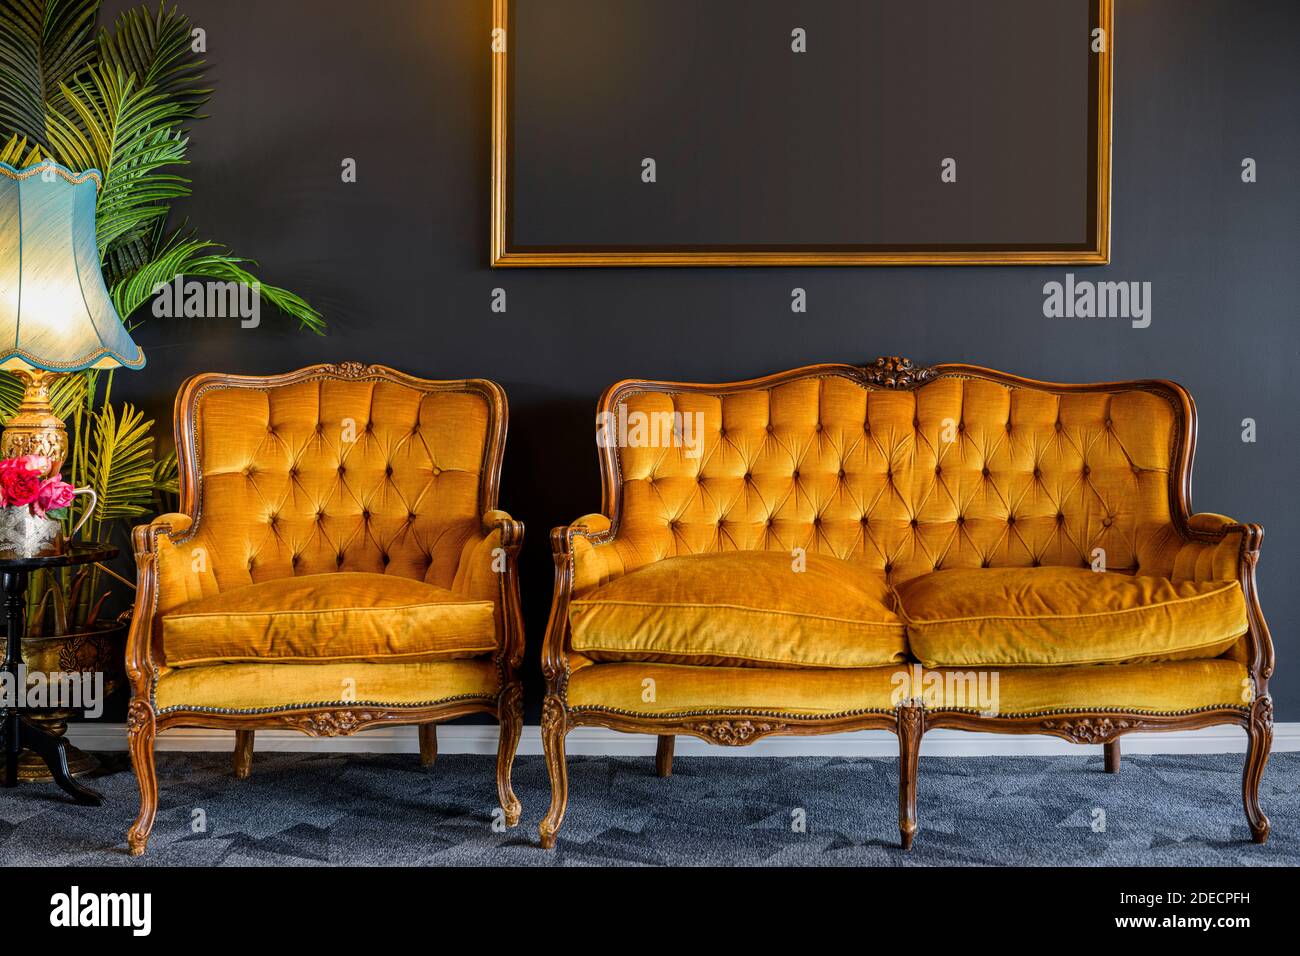 Image of old style, gold yellow chair and sofa in dark grey room Stock Photo